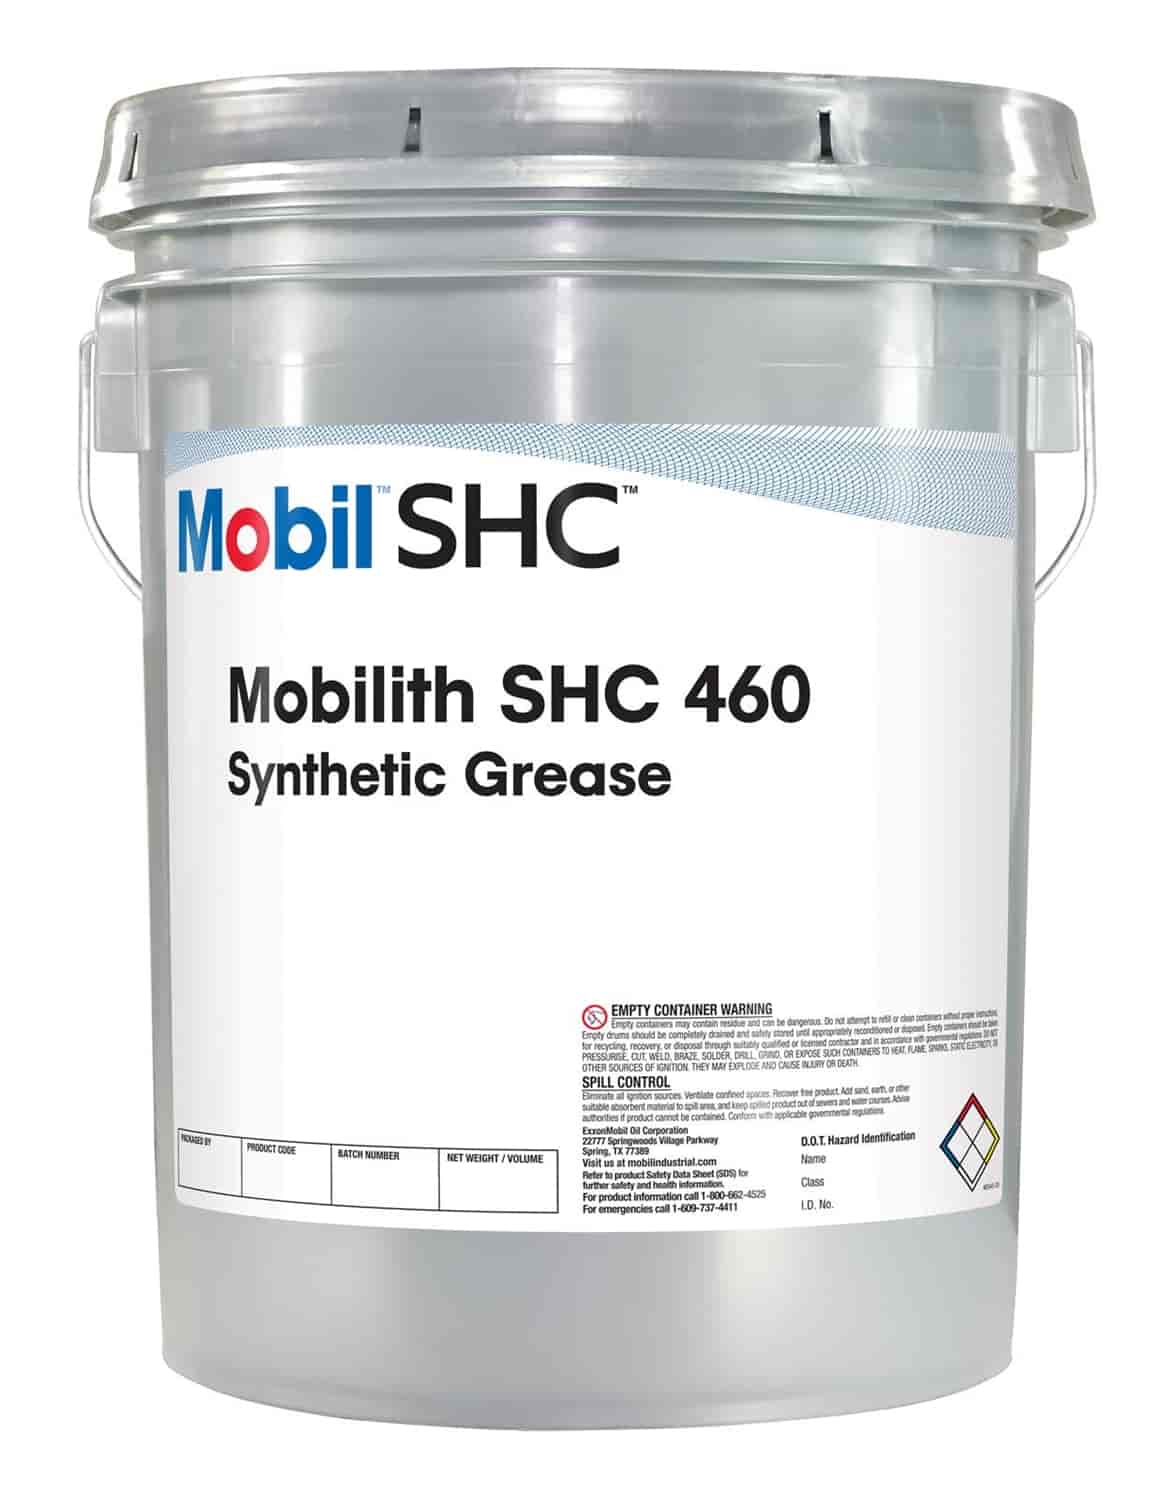 105798 Mobilith SHC 460 Synthetic Grease, 35 lbs. Bucket